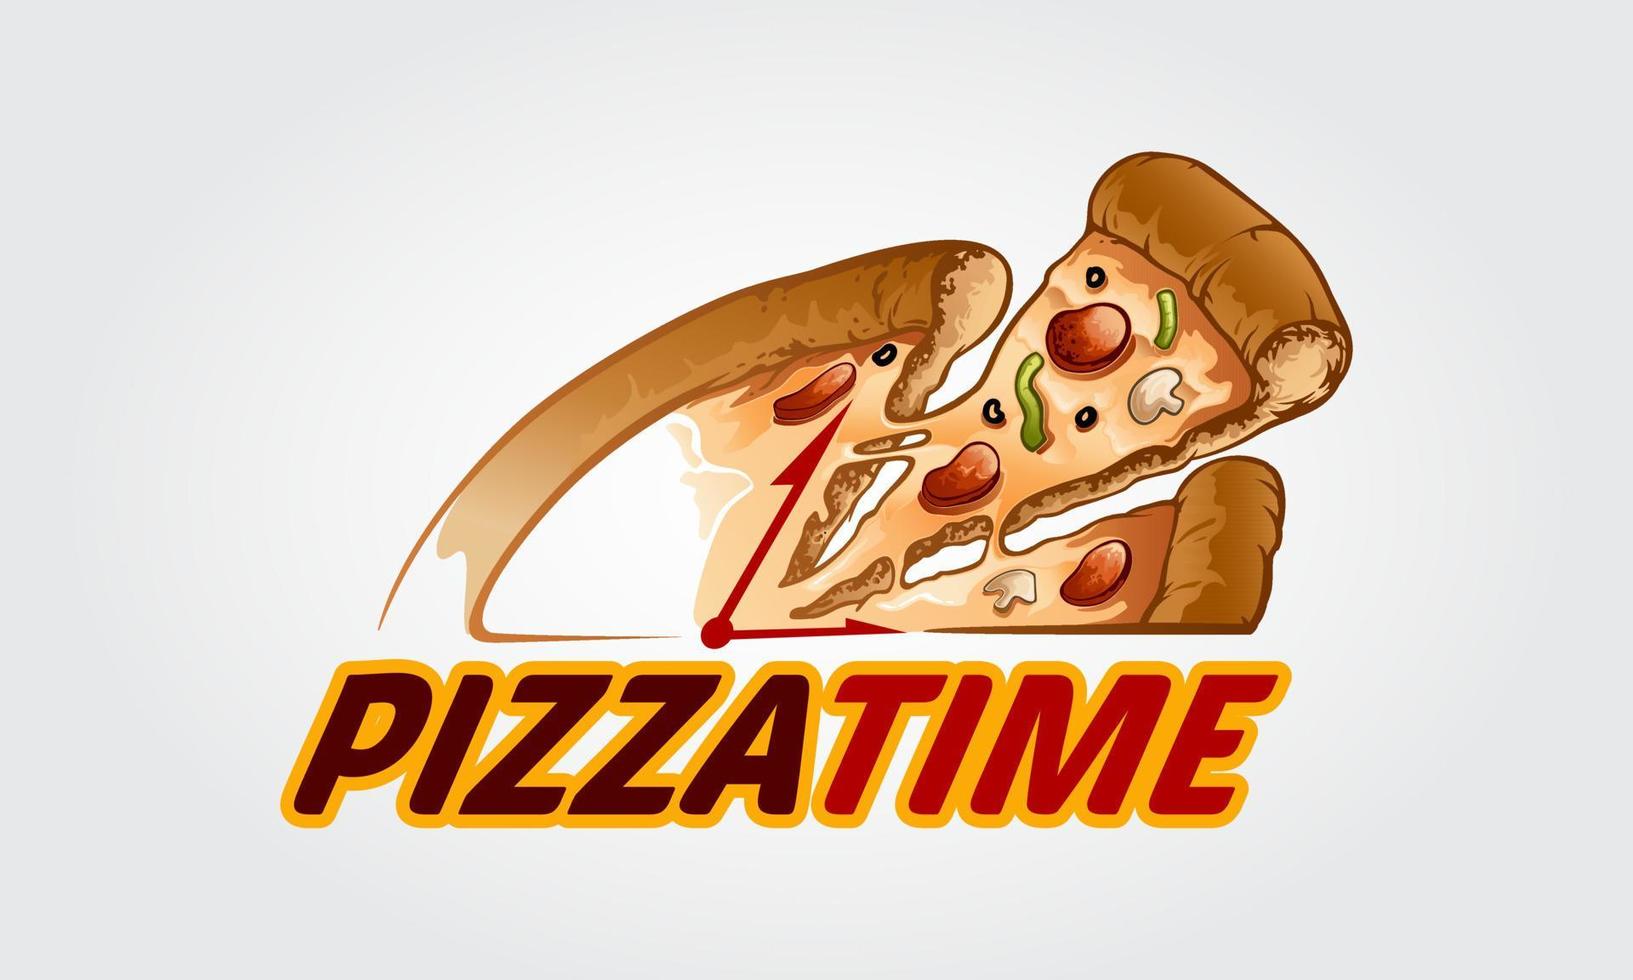 Pizza Time Vector Logo Cartoon. This logo is highly suitable for any pizza related restaurant, fast food, delivery, trattoria, bistro, catering and Italian food related businesses.